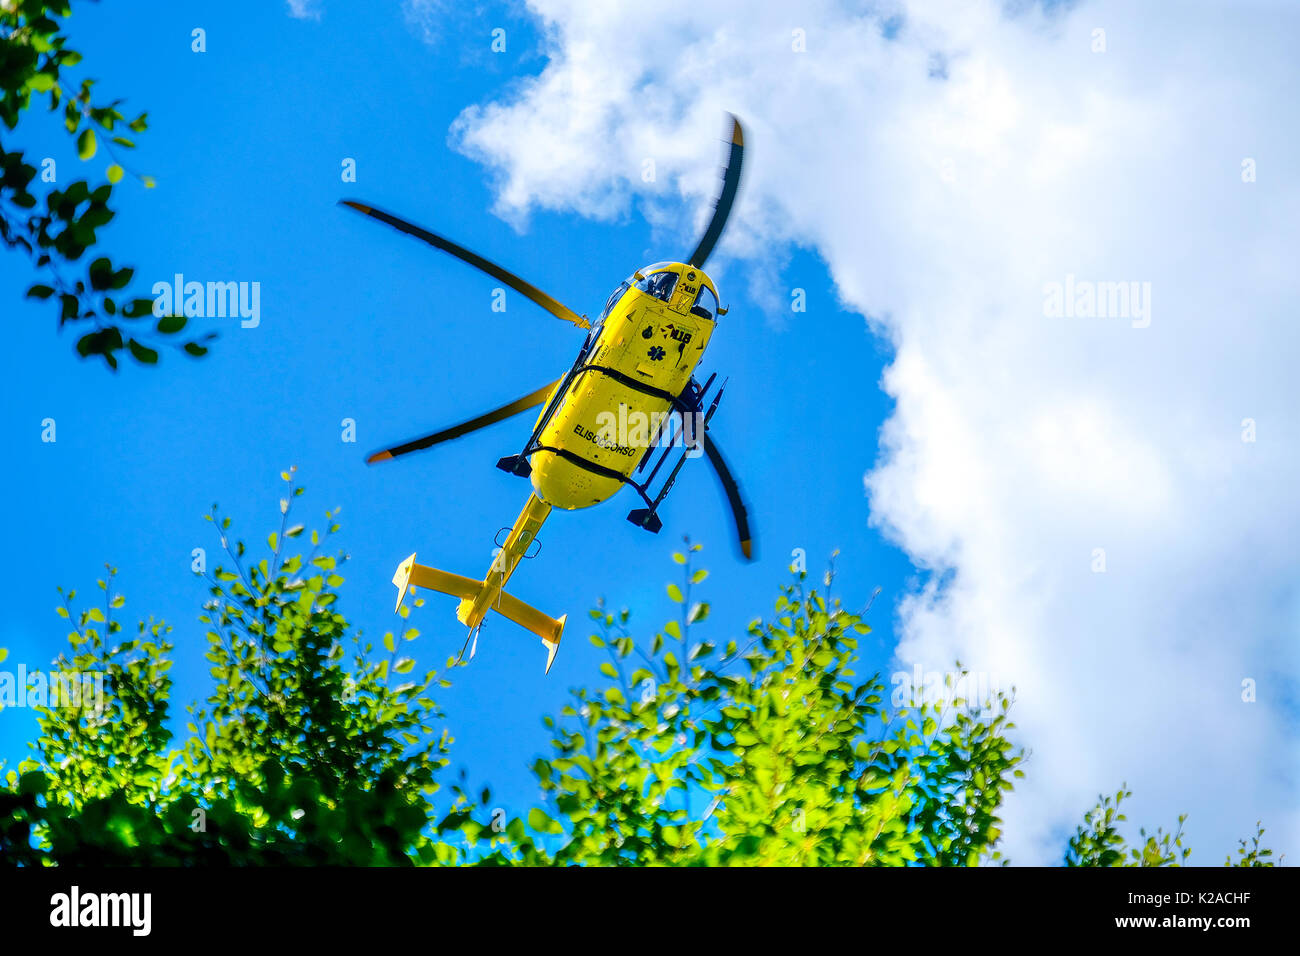 Modena, 27 Aug 2017:  an italian Elisoccorso ( helicopter rescue medical service ) yellow helicopter used for mountain rescue Stock Photo